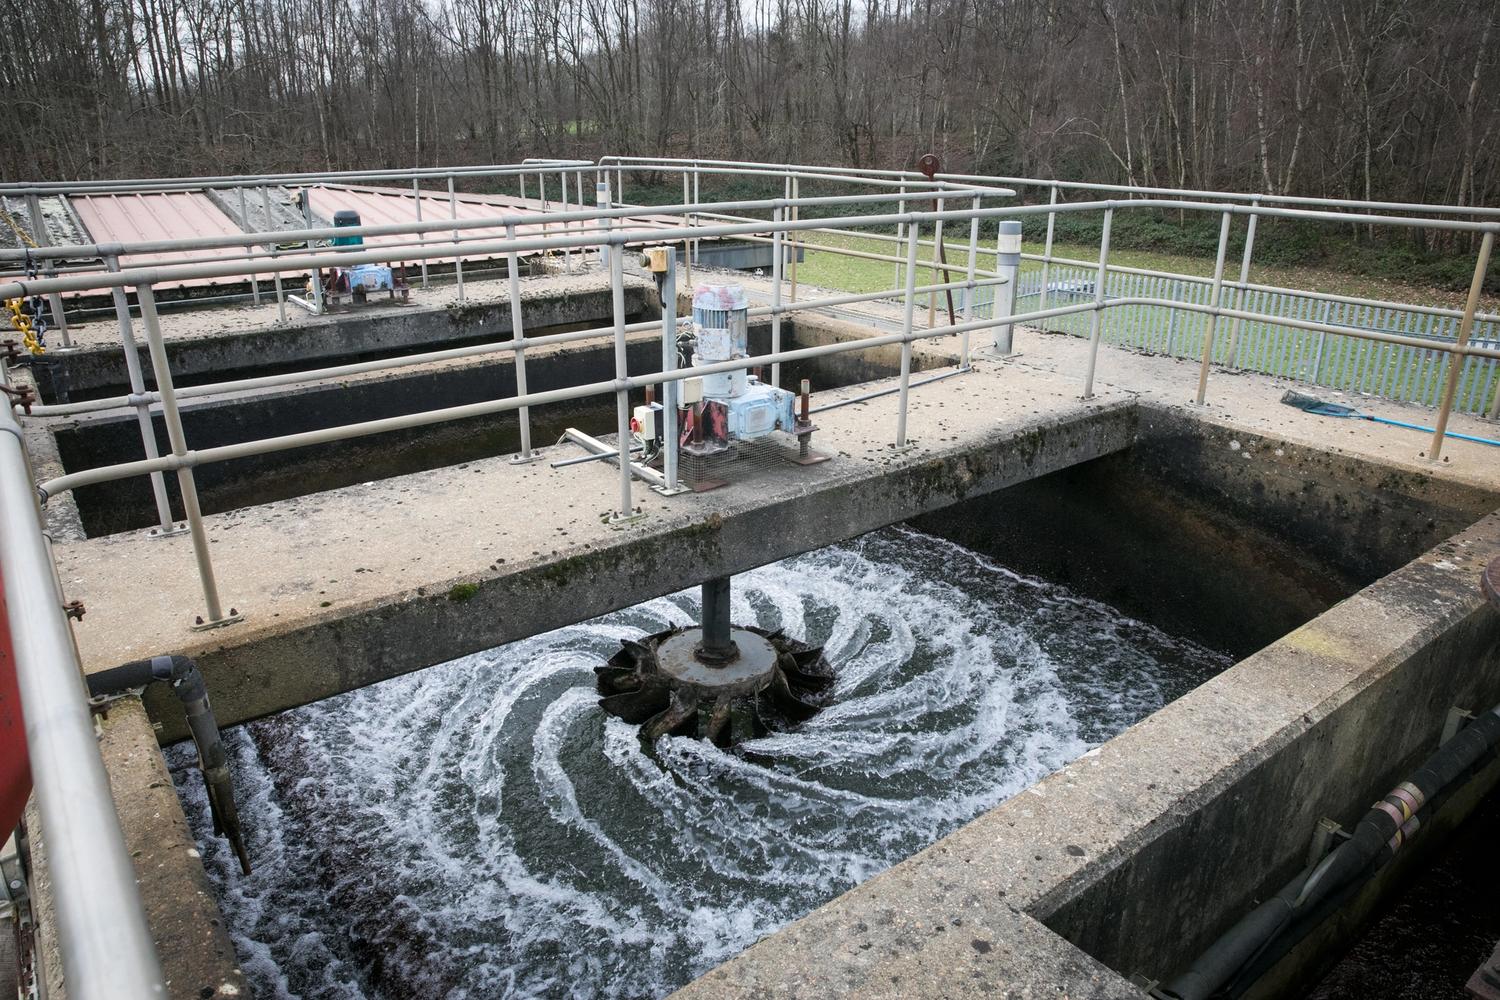 Photograph of water being treated at one of South East Water's water treatment plants.